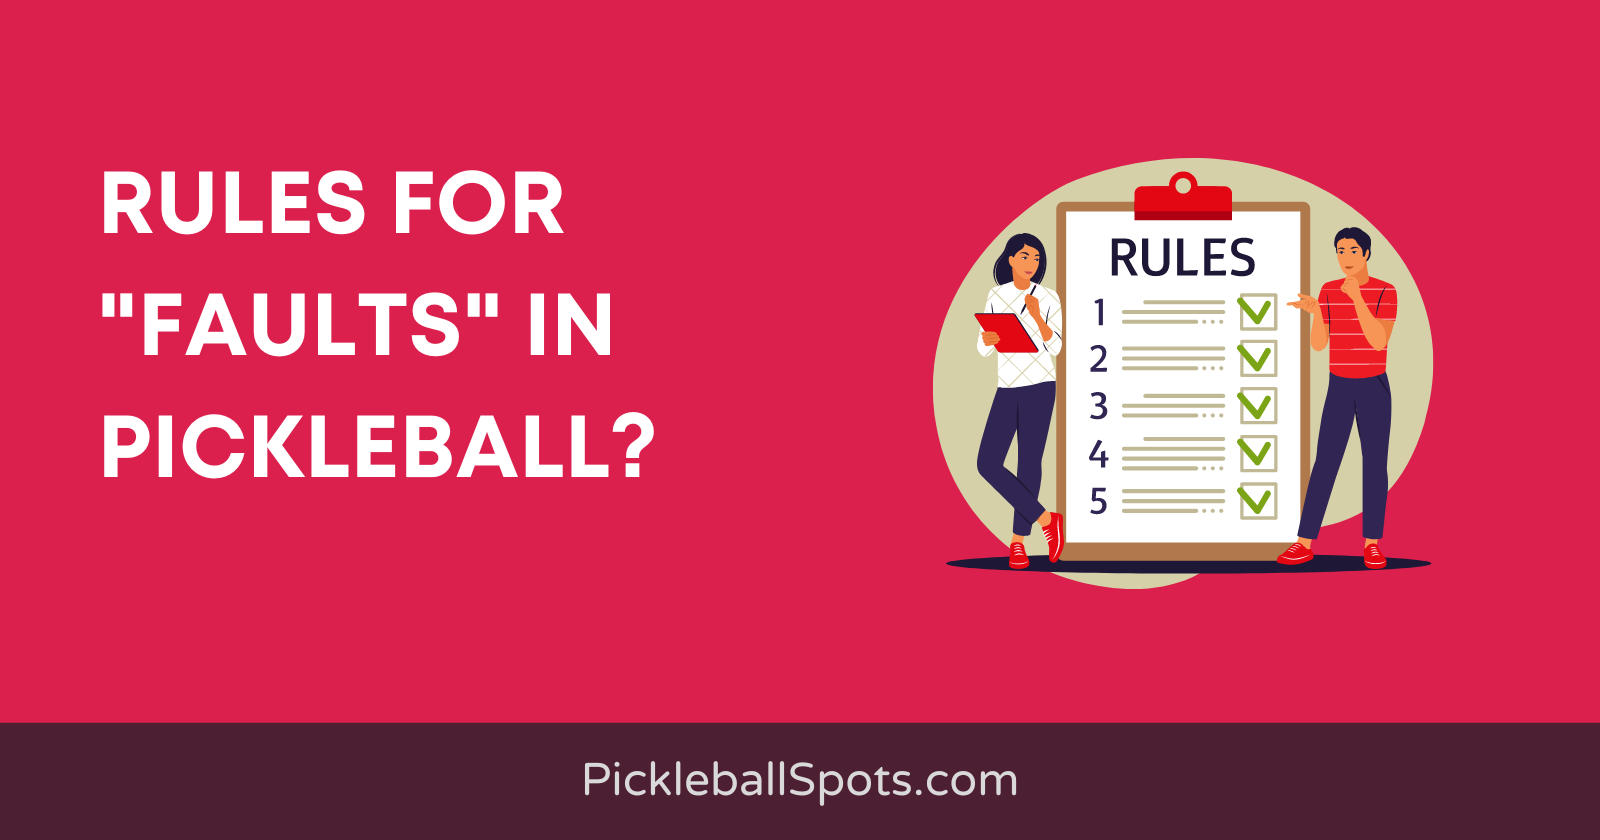 Fault Rules In Pickleball